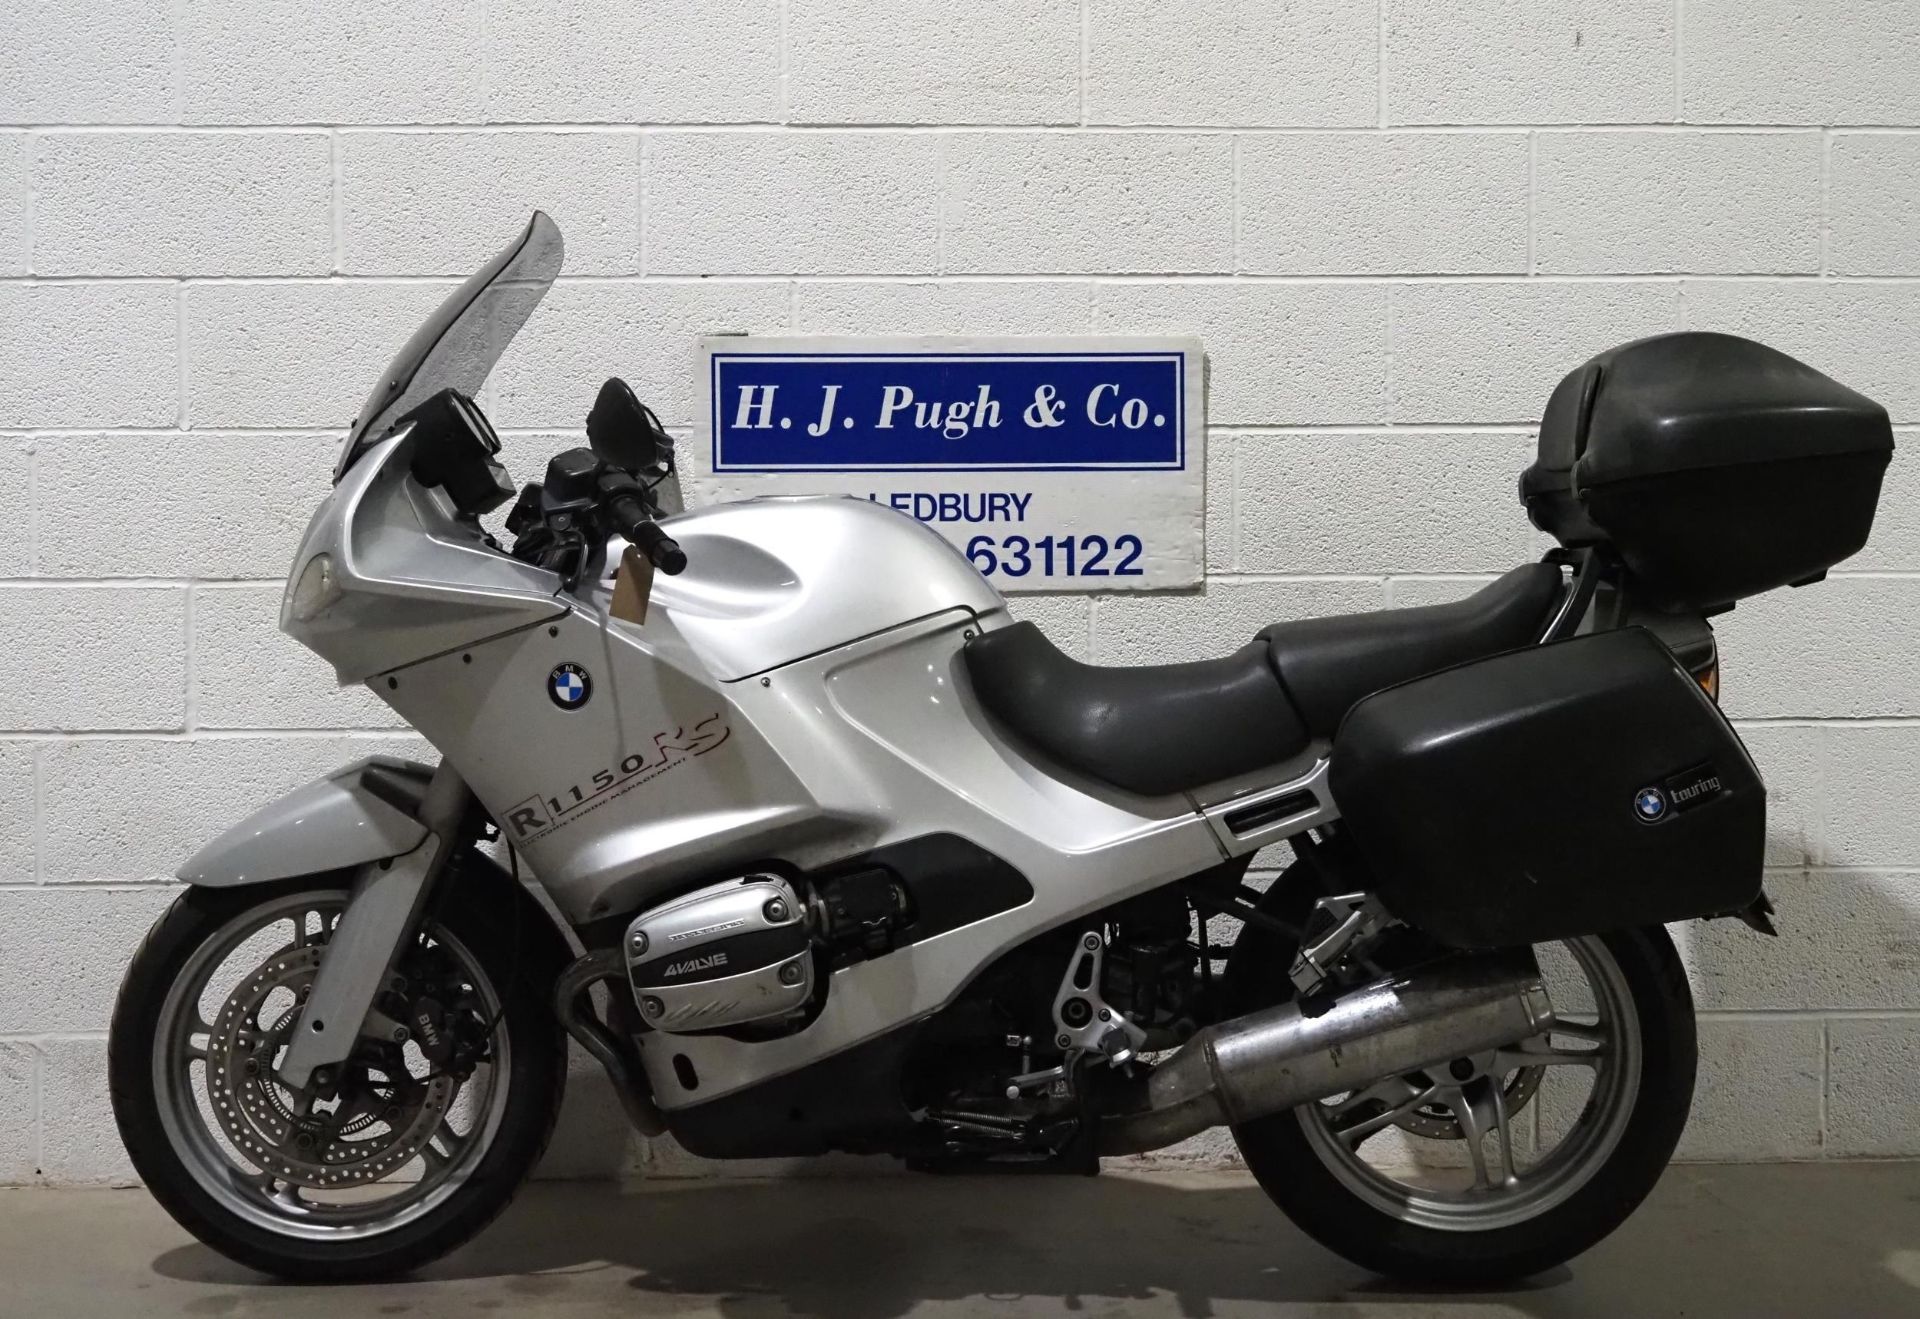 BMW R1150RS motorcycle. 2003. 1130cc. Runs and rides. MOT until 24.07.24. Recorded CAT D in 2014. - Bild 5 aus 5